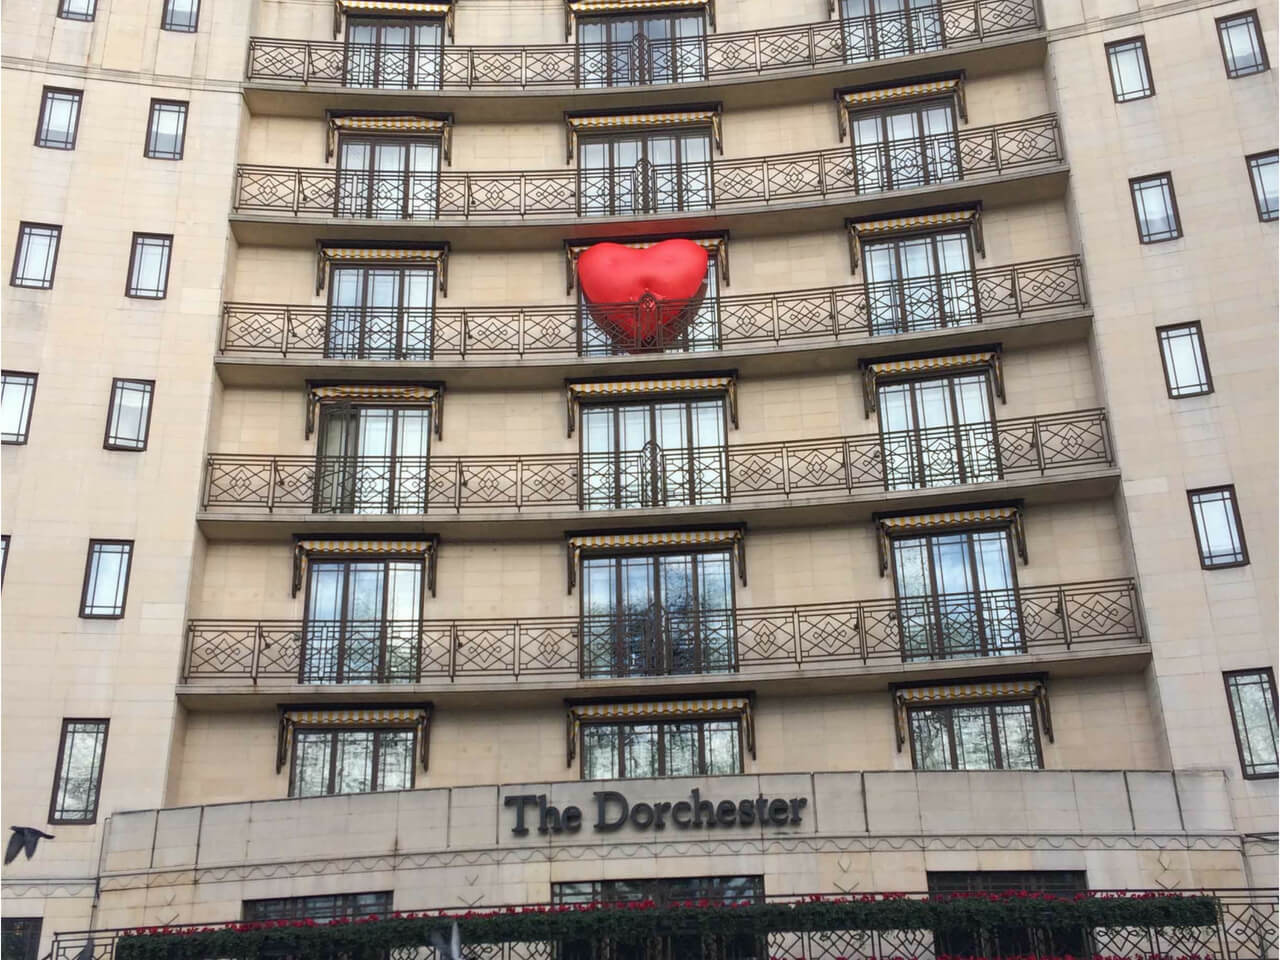 Inflatable Chubby Heart at Dorchester hotel